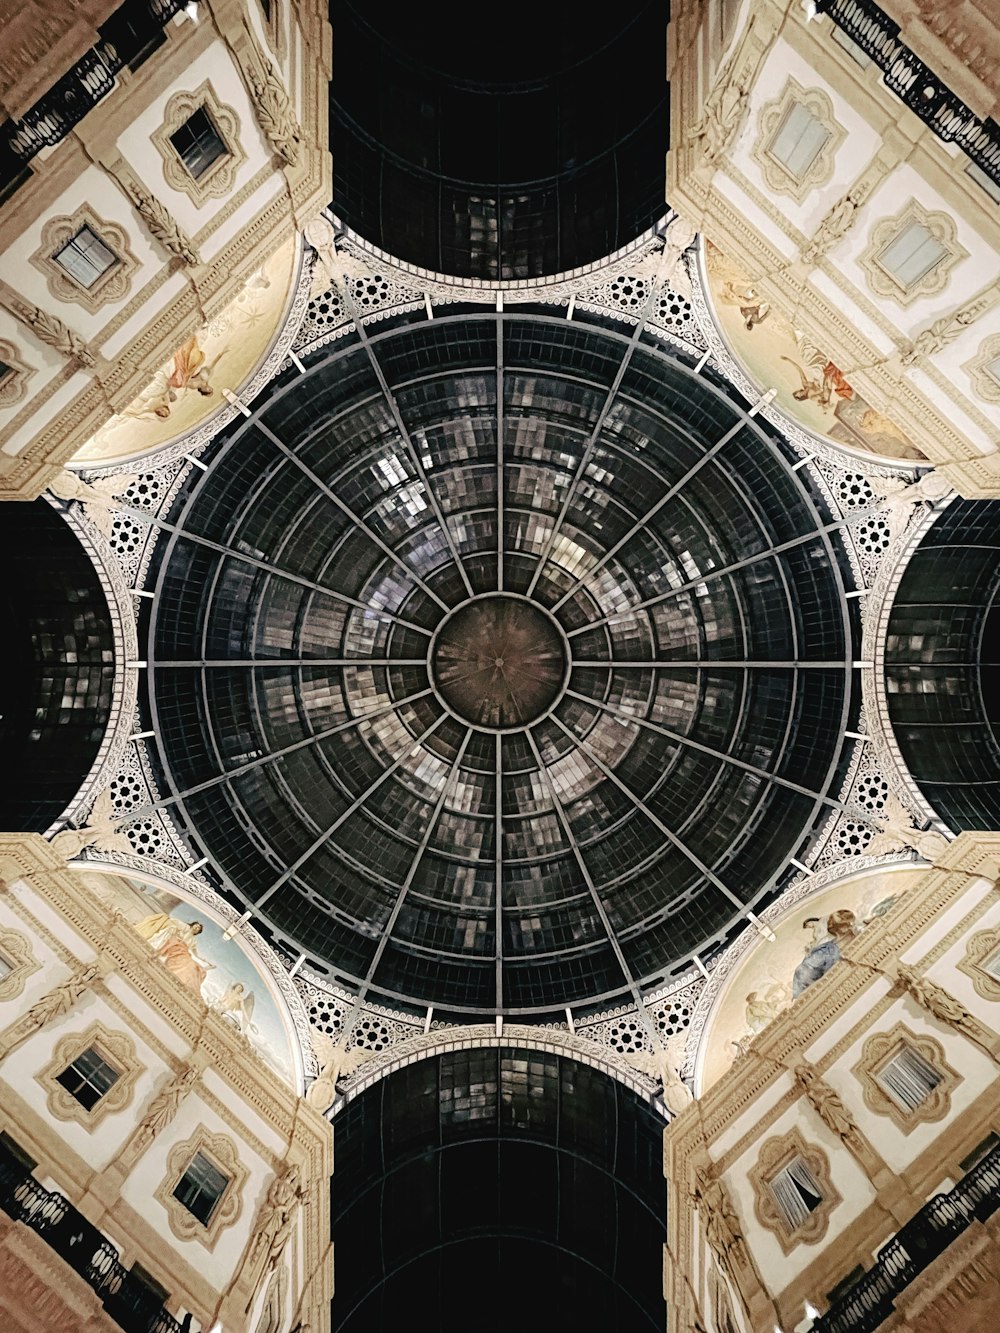 an overhead view of the ceiling of a building